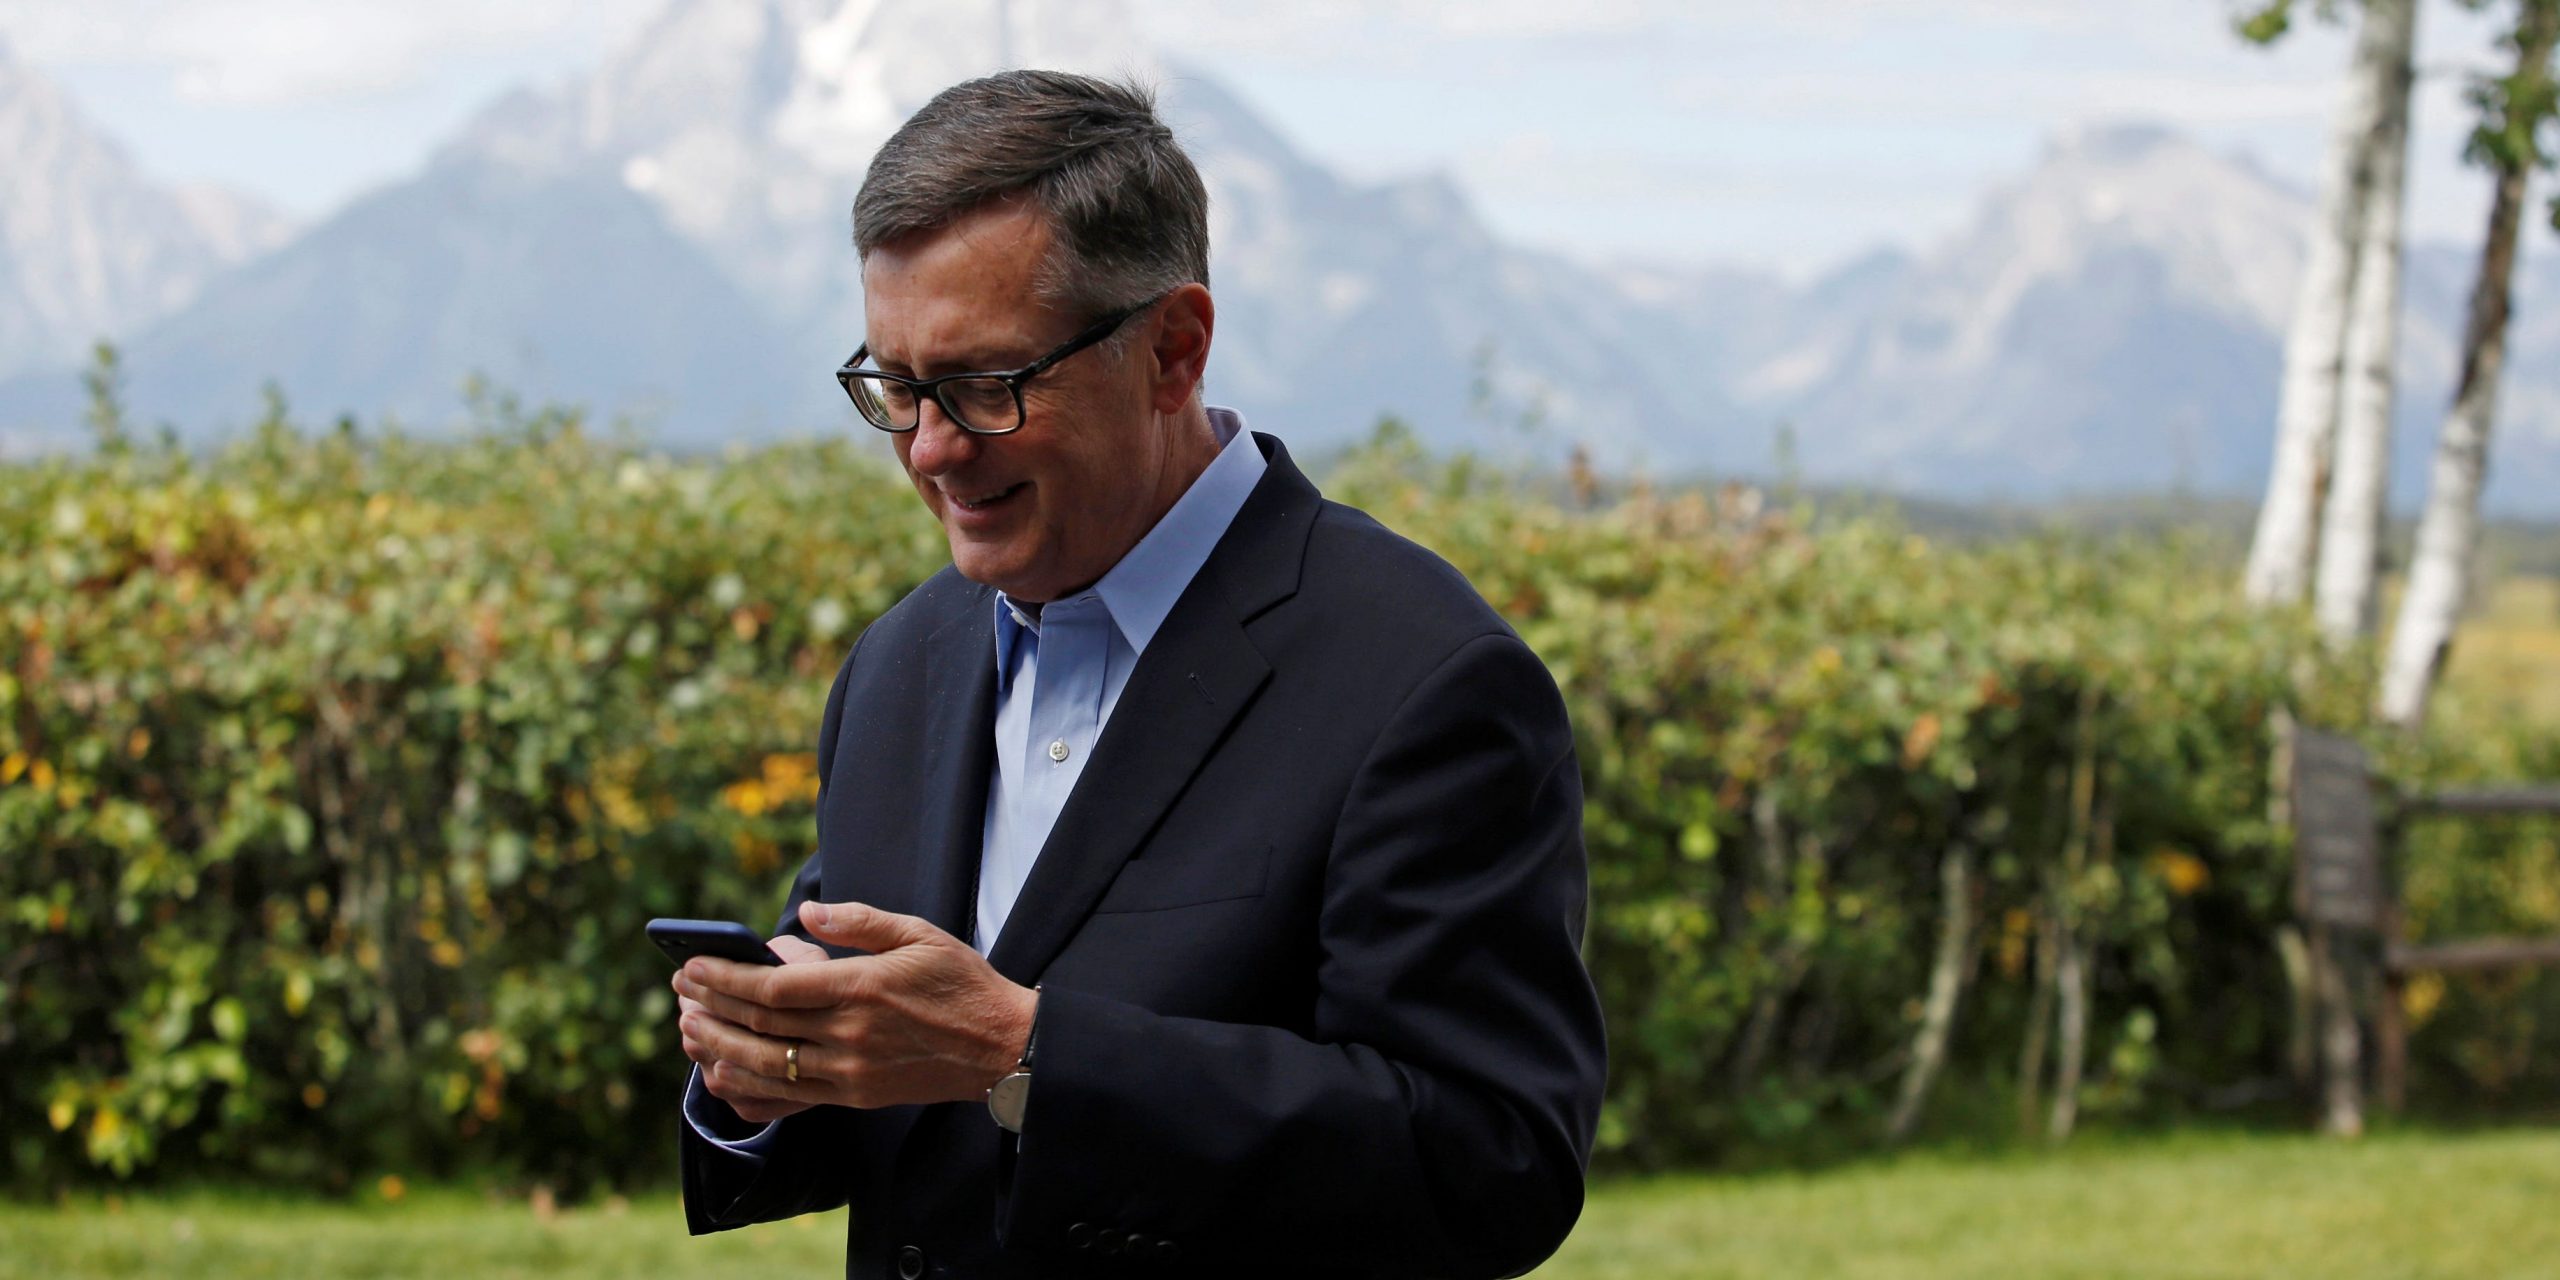 FILE PHOTO: Federal Reserve Vice Chair Richard Clarida reacts as he holds his phone during the three-day "Challenges for Monetary Policy" conference in Jackson Hole, Wyoming, U.S., August 23, 2019.  REUTERS/Jonathan Crosby